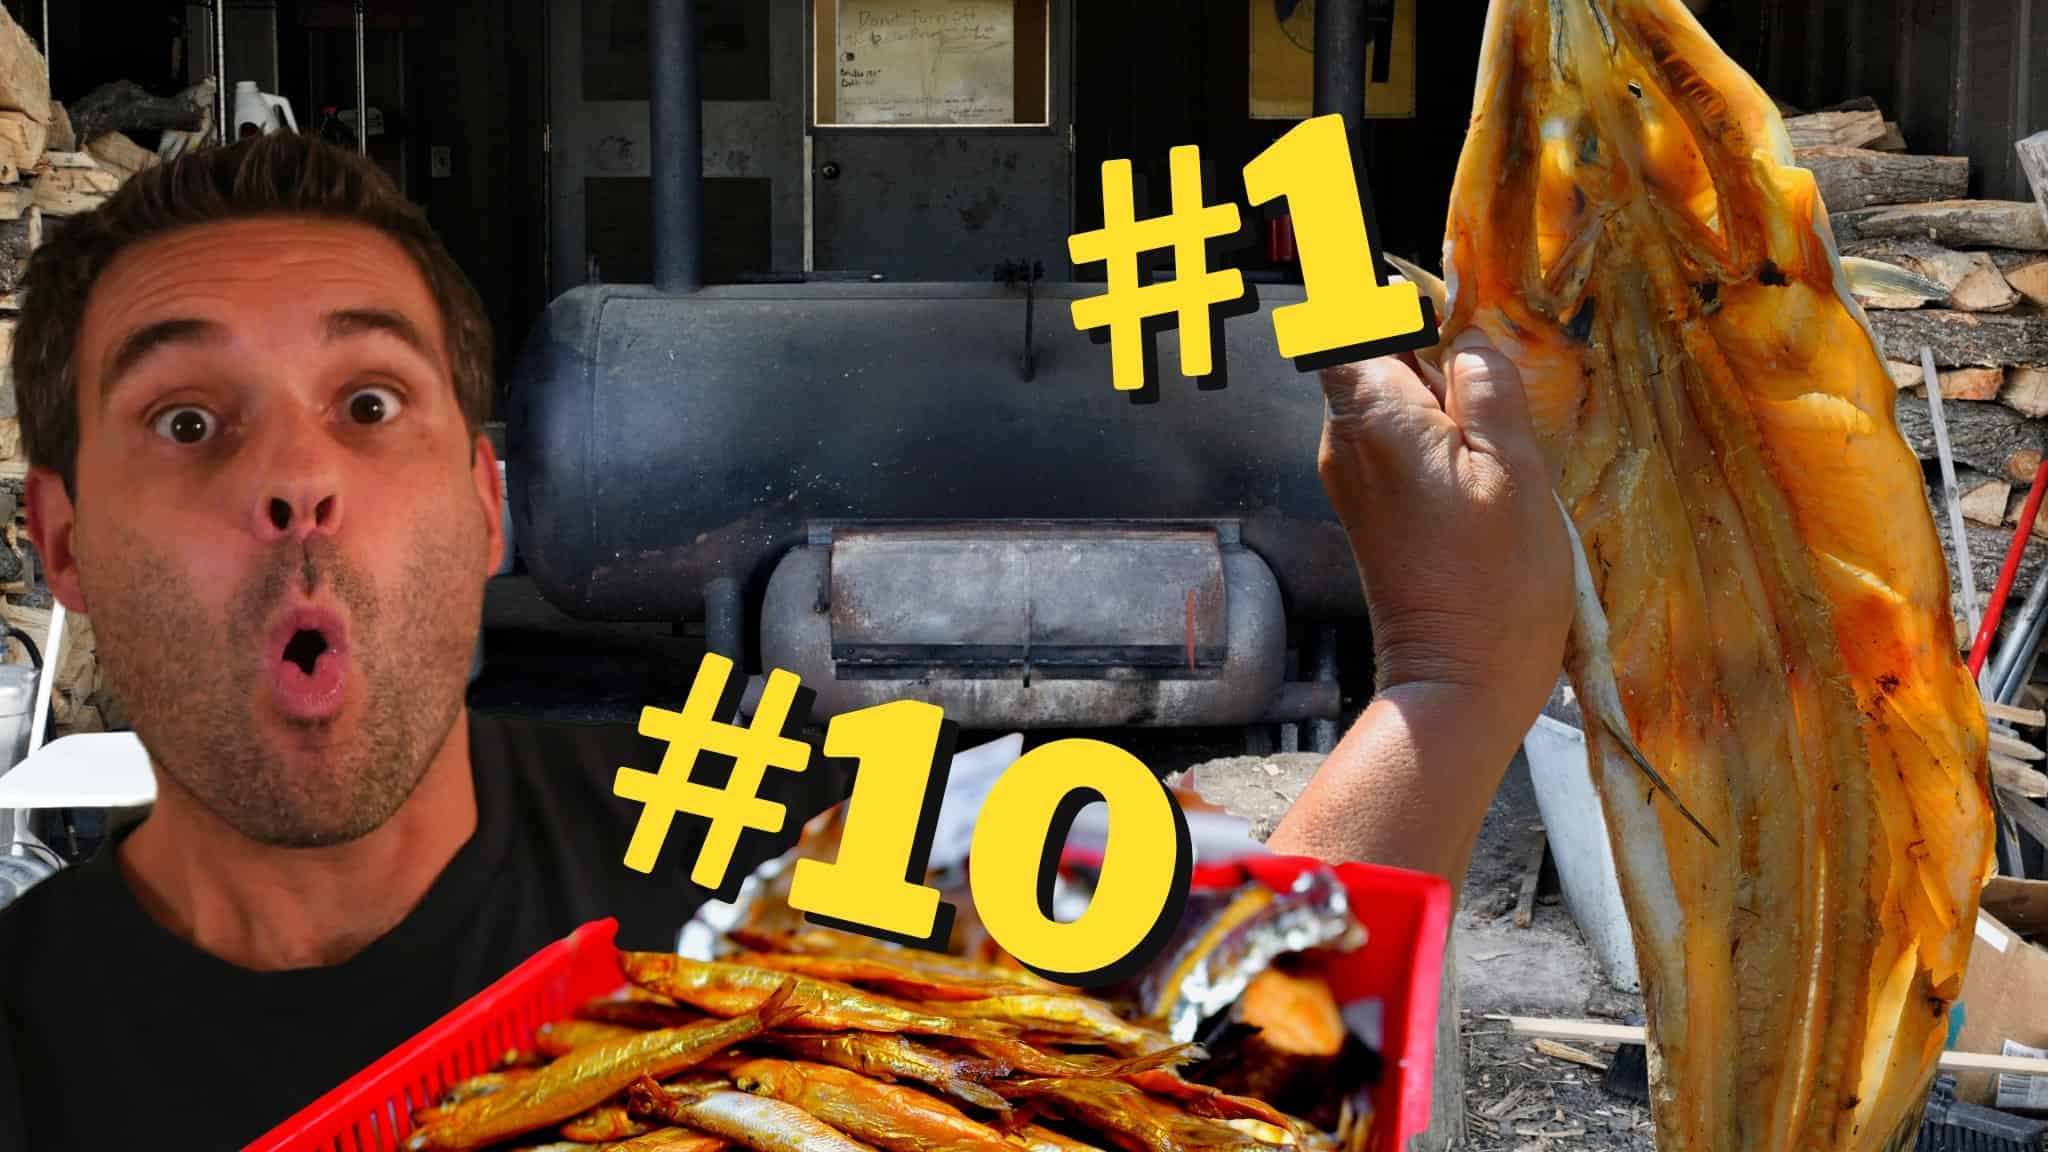 Best fish to smoke | Top 10 smoking choices for the seafood lover